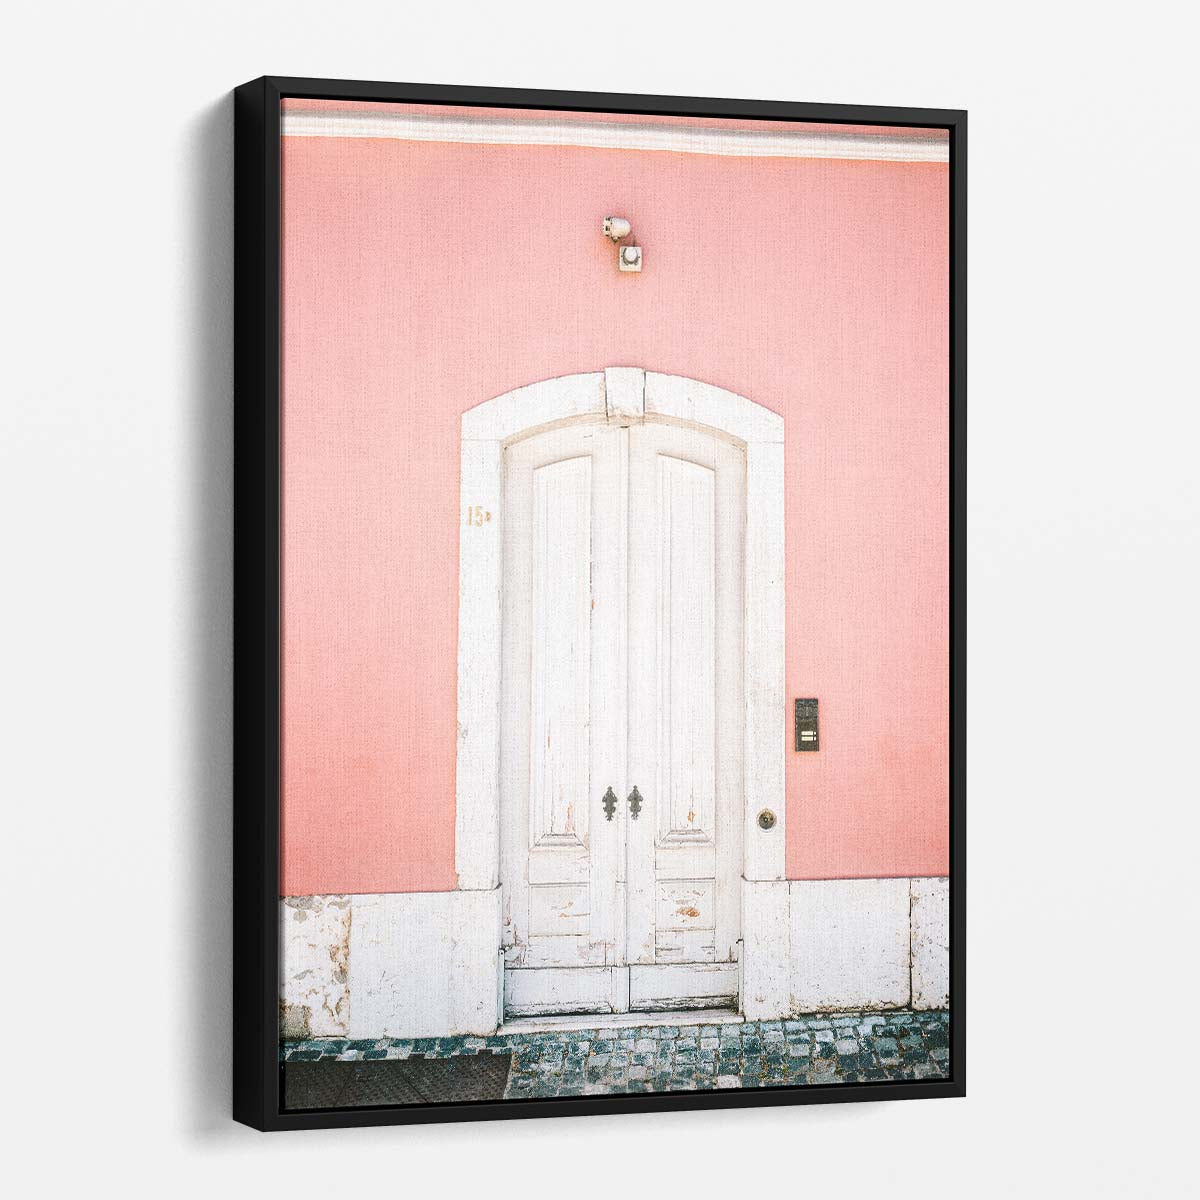 Lisbon Portugal Architectural Photography Red Door Facade Wall Art by Luxuriance Designs, made in USA